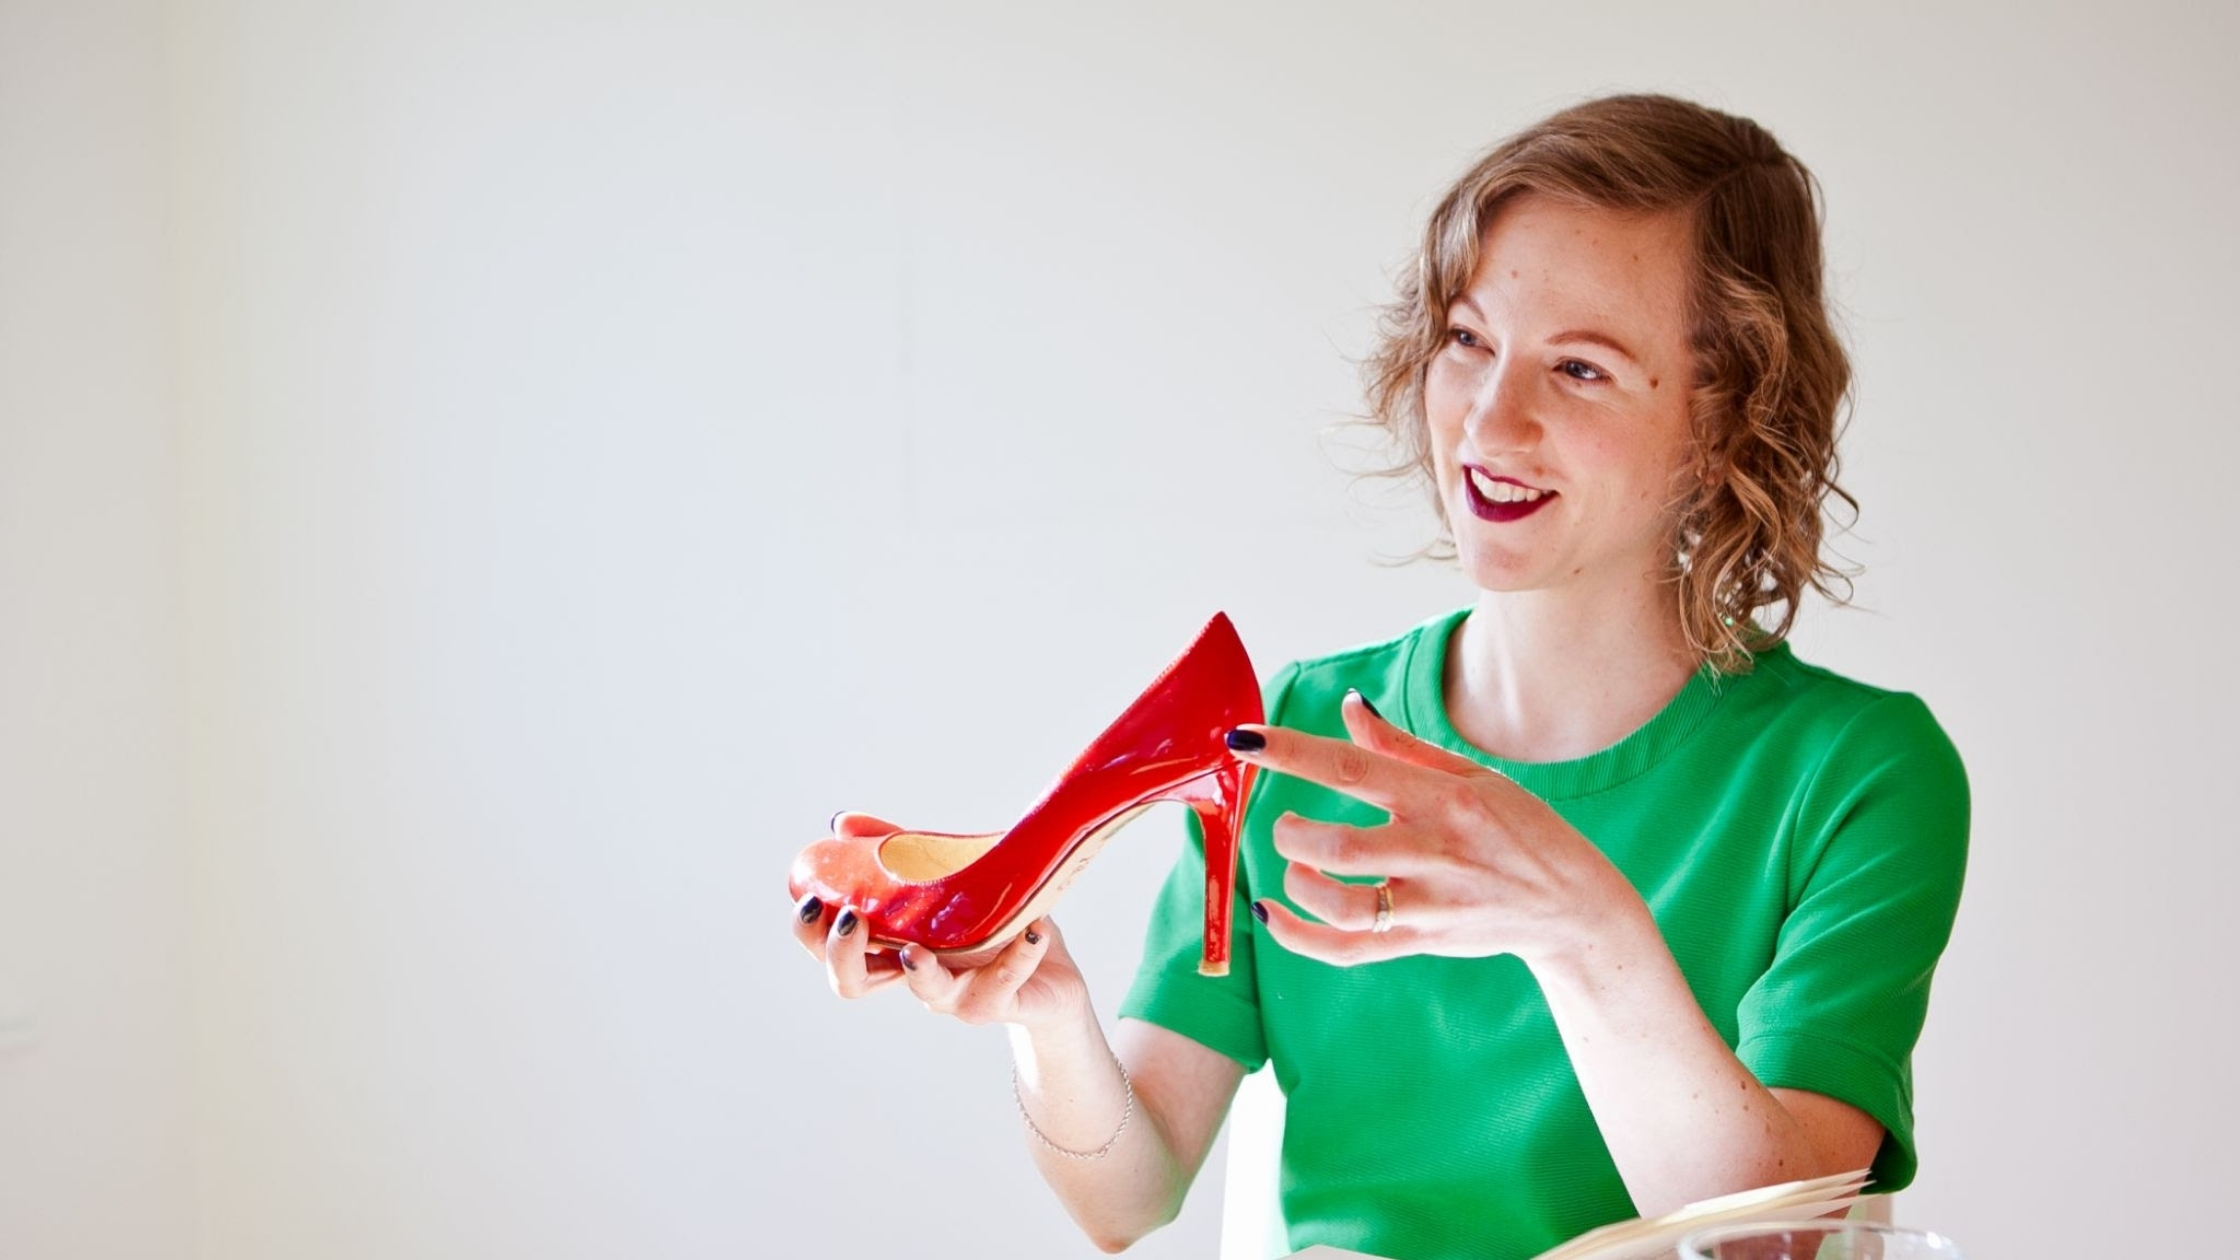 AMA: Susannah Davda, founder of The Shoe Consultant